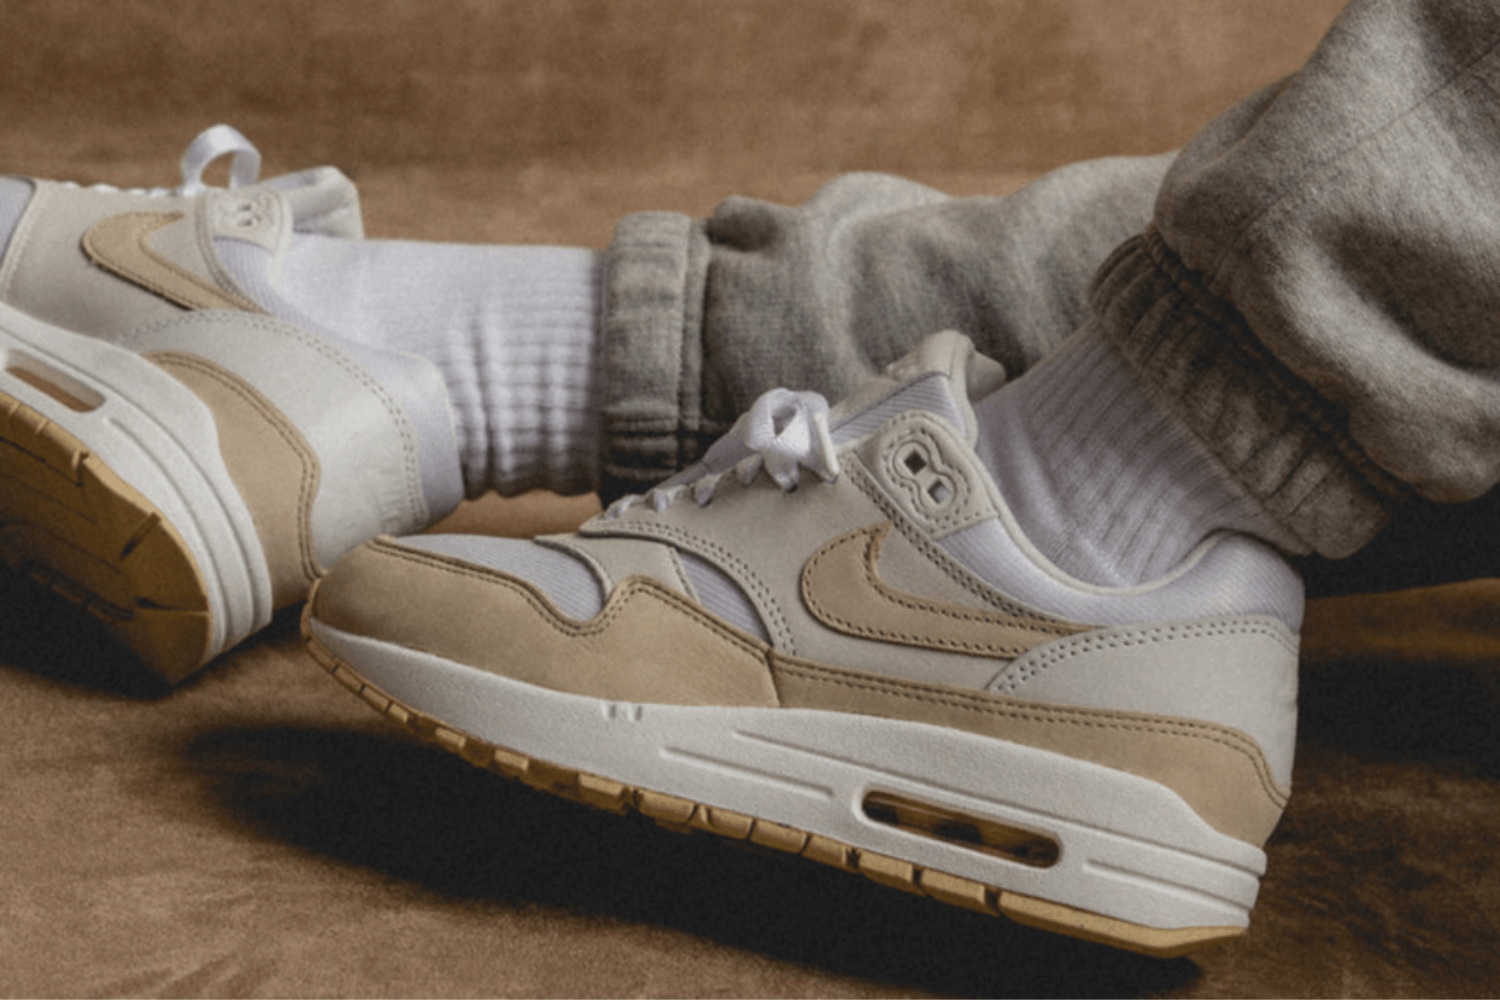 How to style the Nike Air Max 1 WMNS